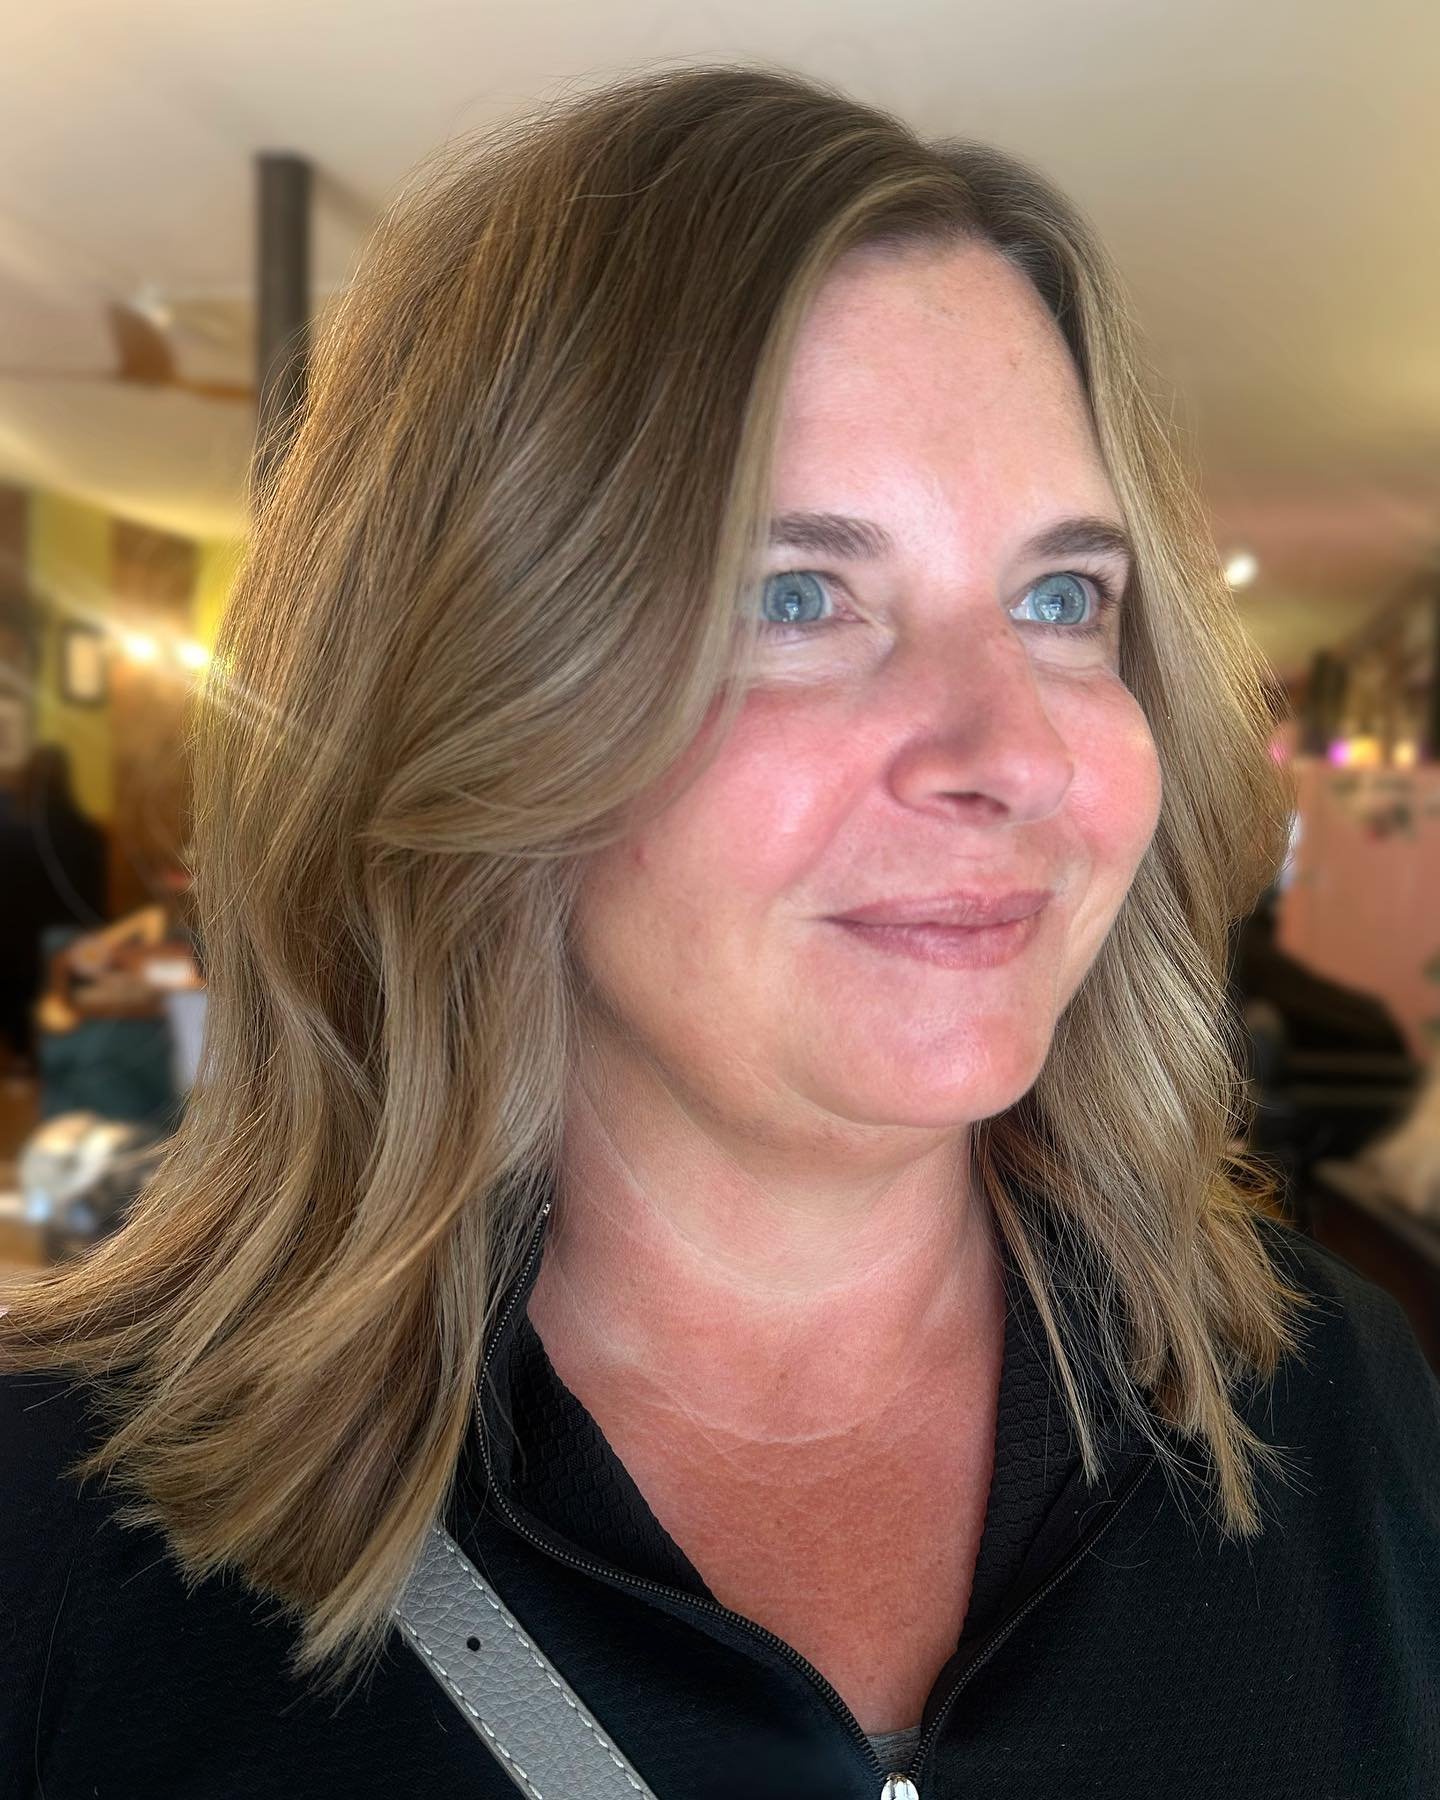 Lived in bronde + layered cut. Such a good spring time look! 

#chachasalon #lex #lexky #lexington #lexingtonky #lexingtonhairstylist #lexingtonhair #kyhair #kyhairstylist #universityofkentucky #bronde